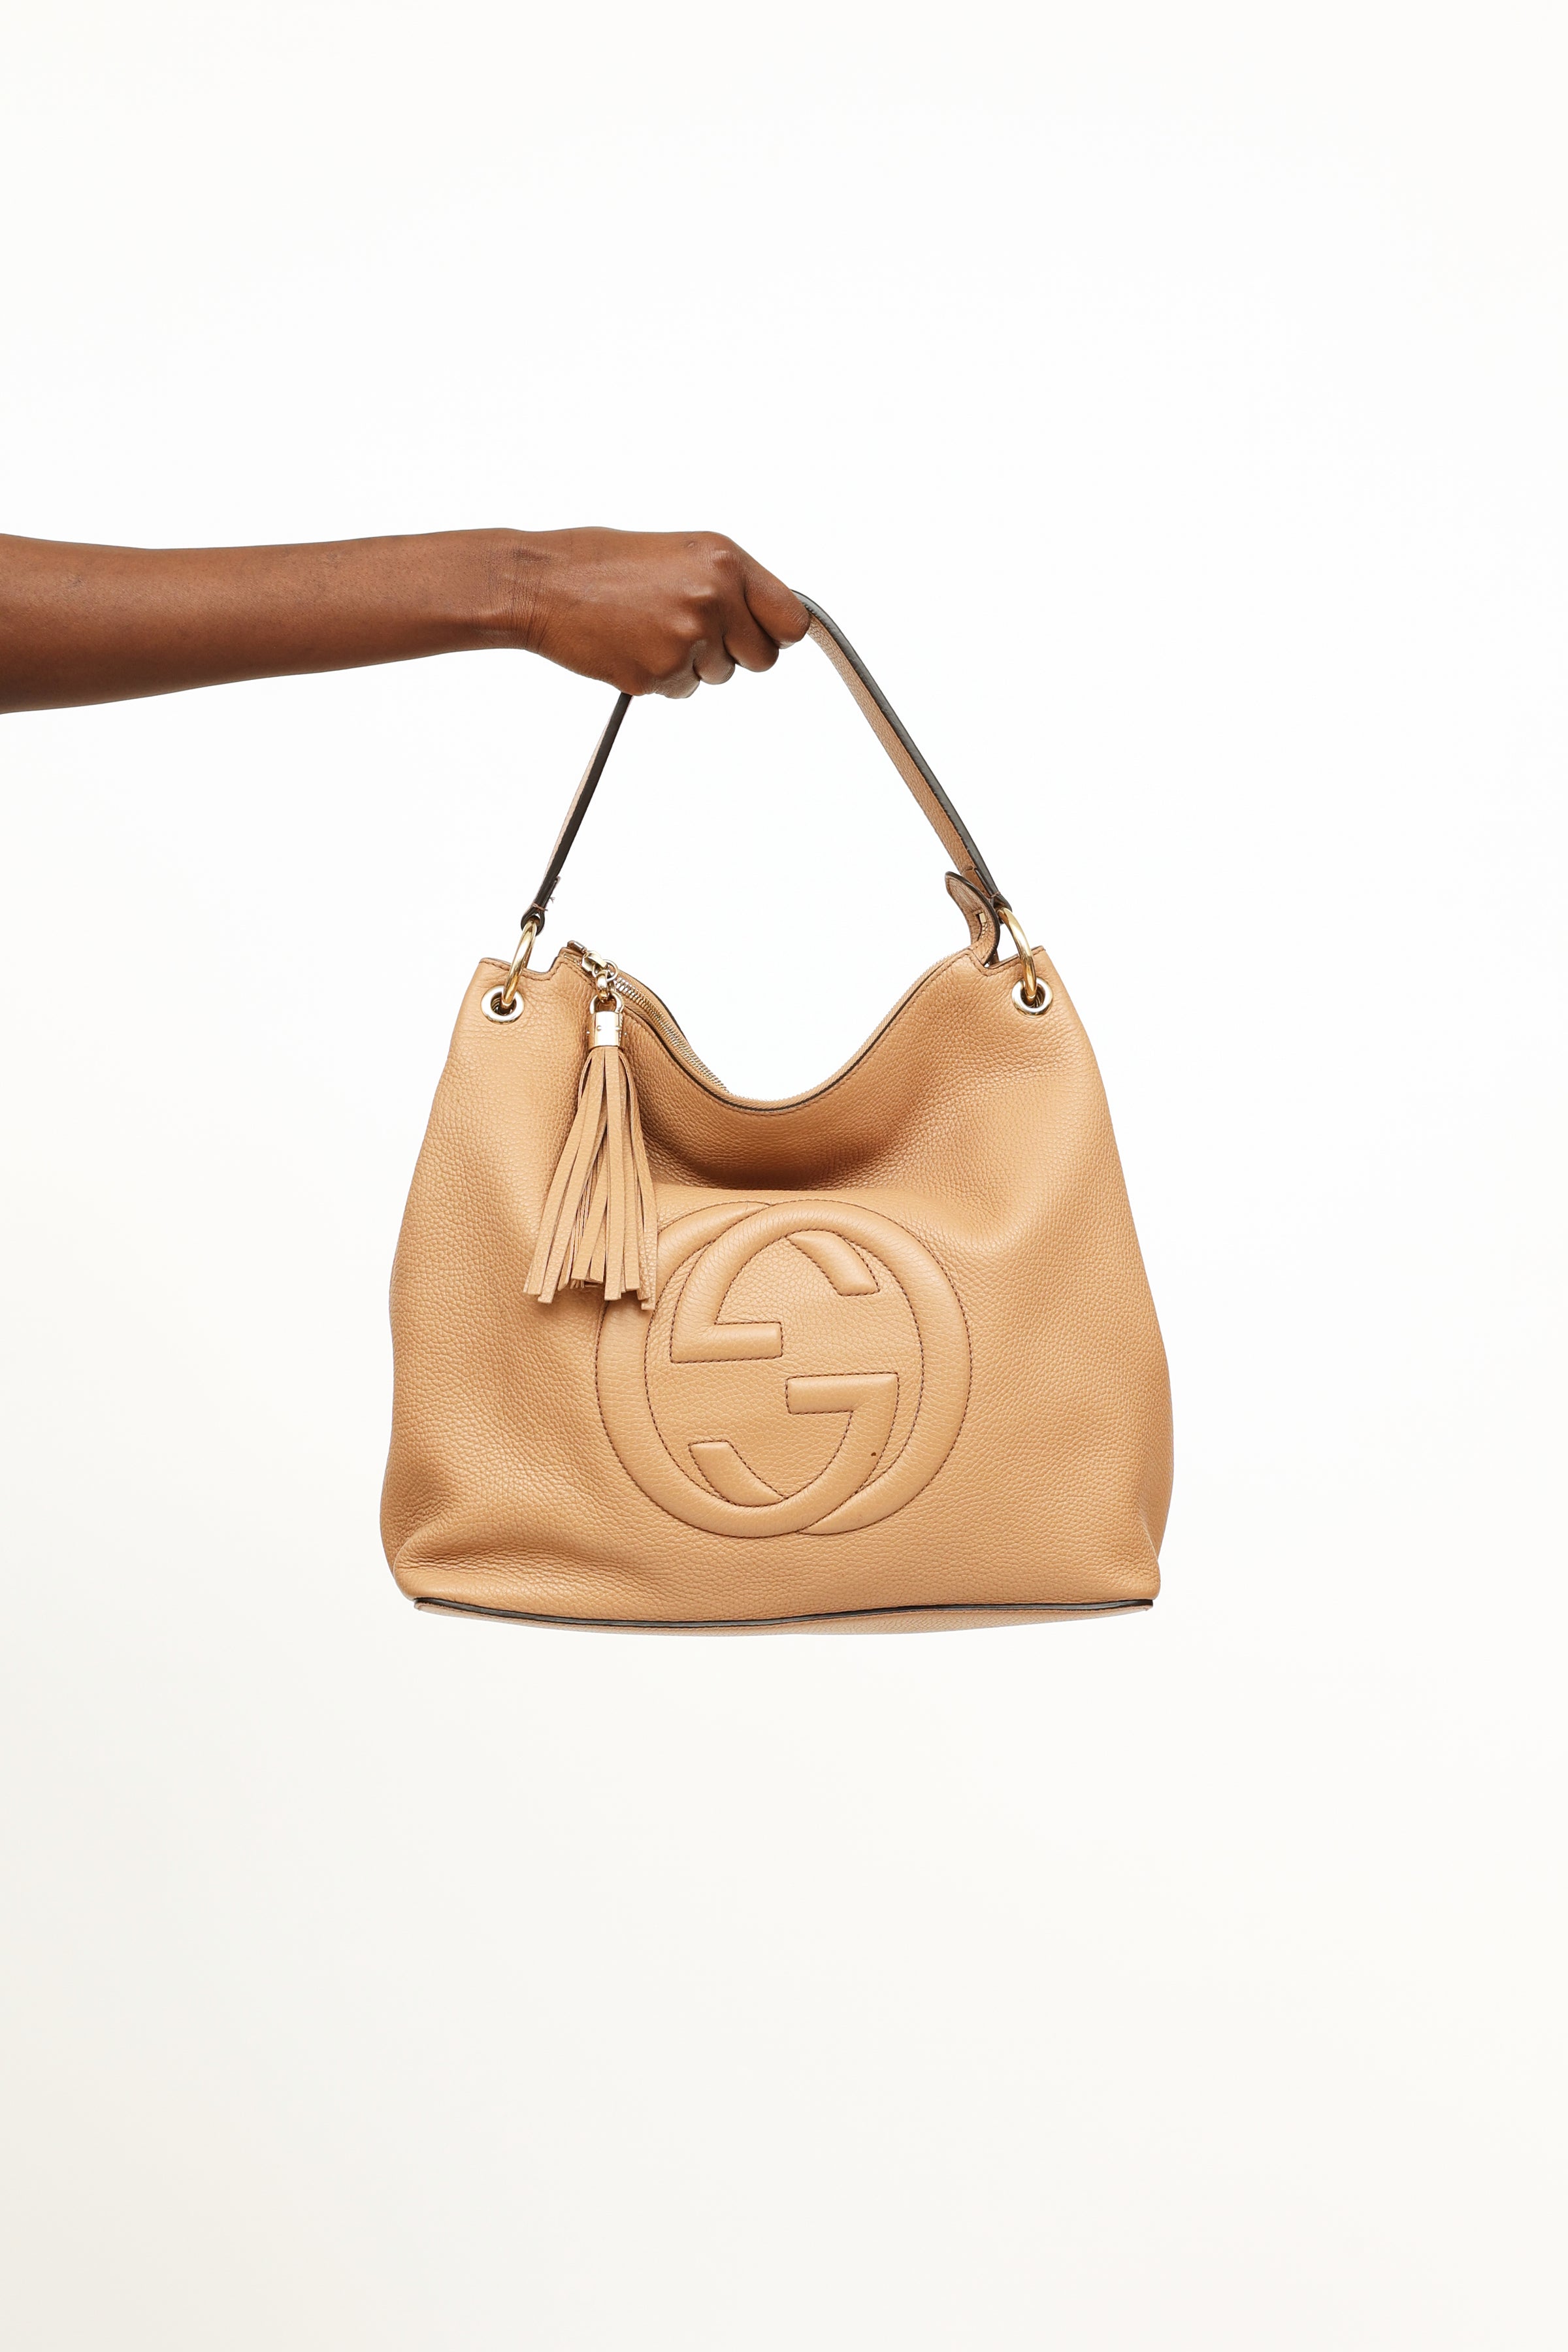 Gucci // Beige Leather Chain Shoulder Bag – VSP Consignment